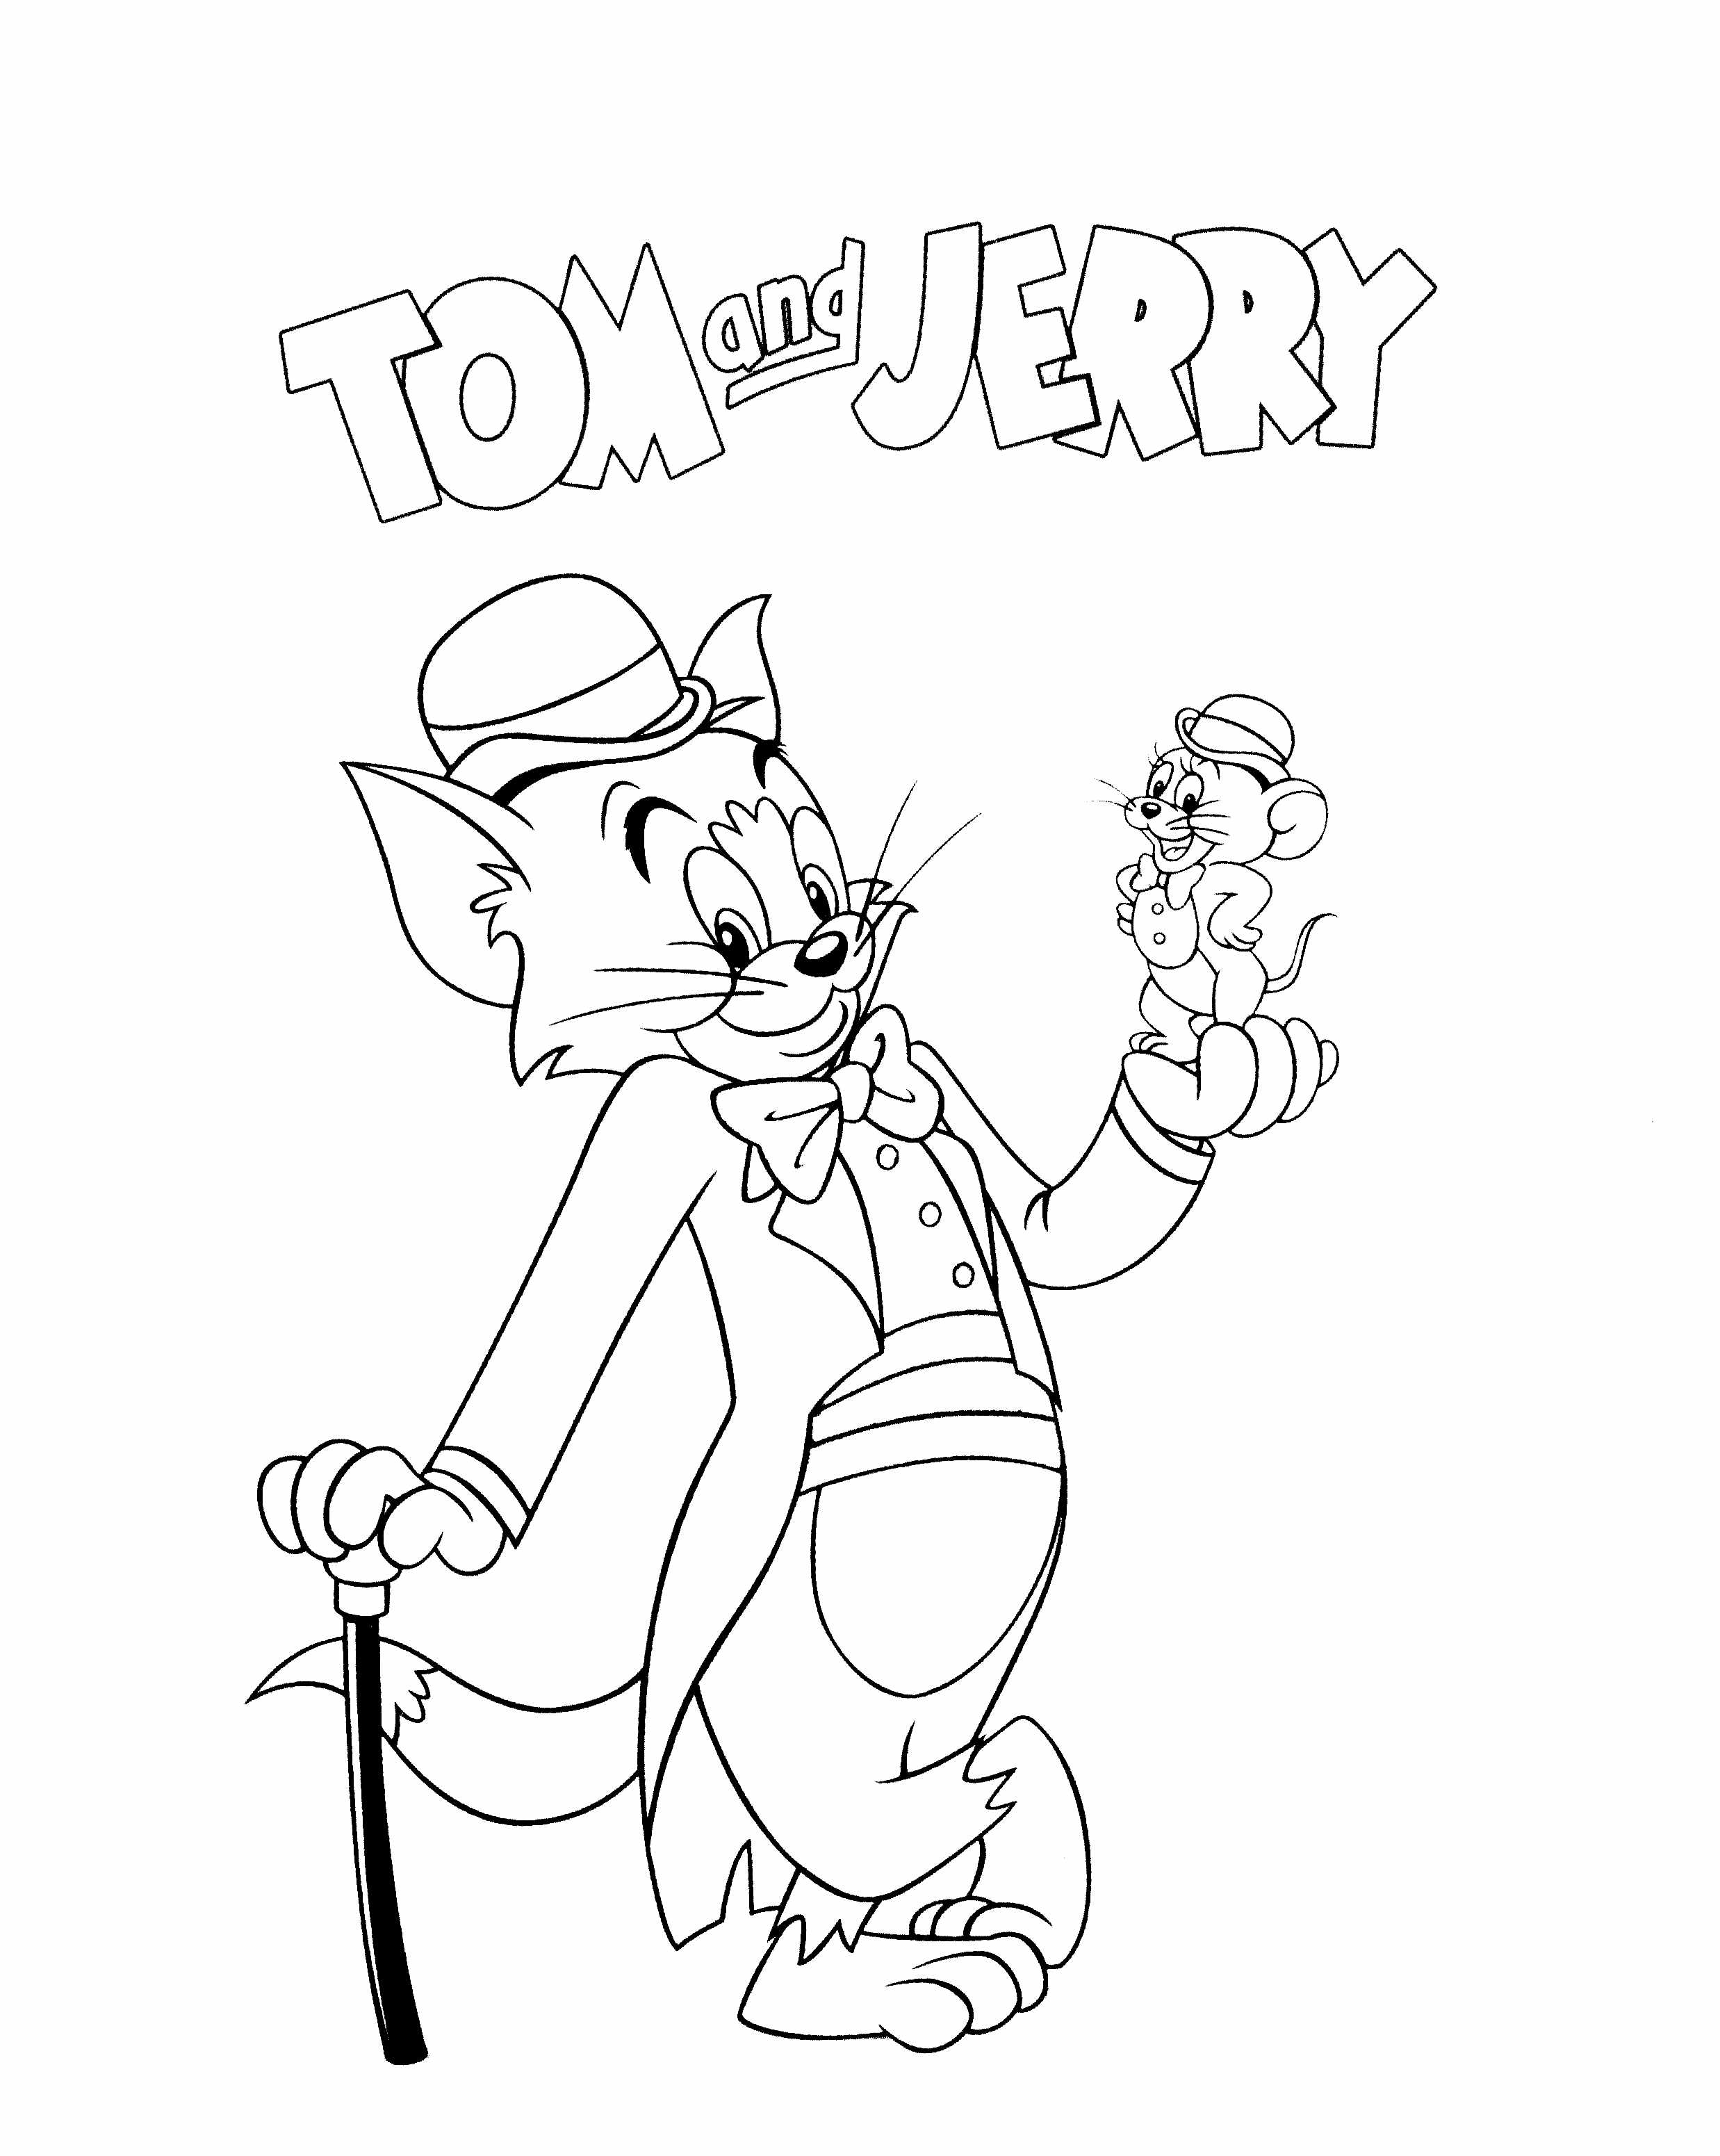 Tom Cat production cel and drawing from a Tom and Jerry cartoon | RR